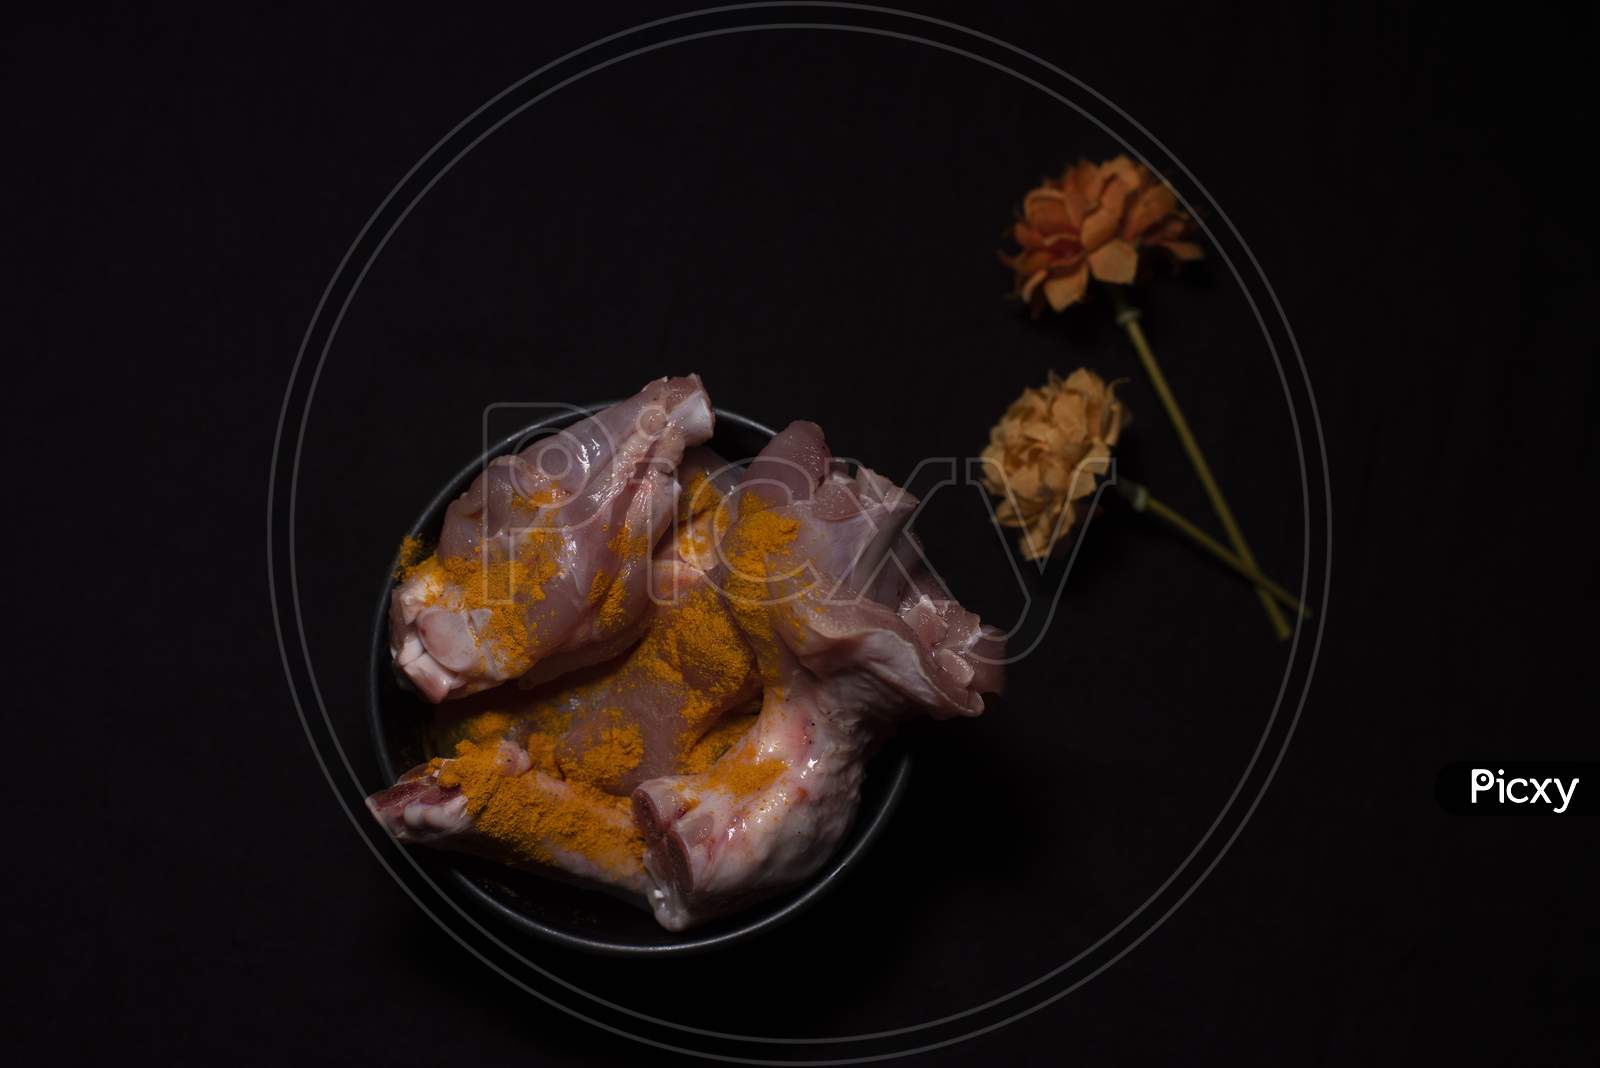 Top Down Image Of A Bowl Of Raw Chicken Pieces Sprinkled With Turmeric Powder Decorated With Dried Flowers In A Dark Copy Space Background. Food And Product Photography.